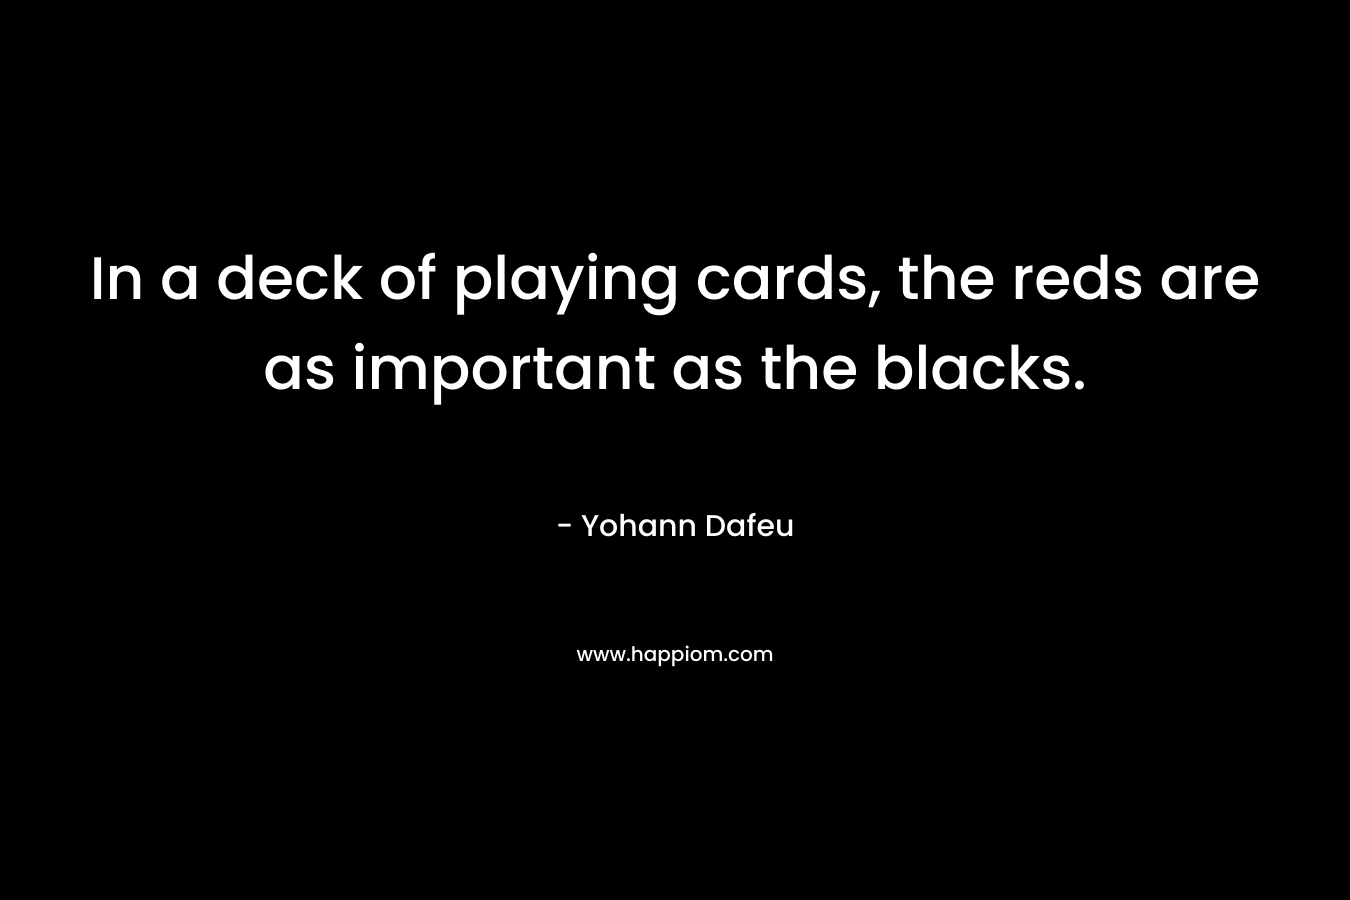 In a deck of playing cards, the reds are as important as the blacks. – Yohann Dafeu